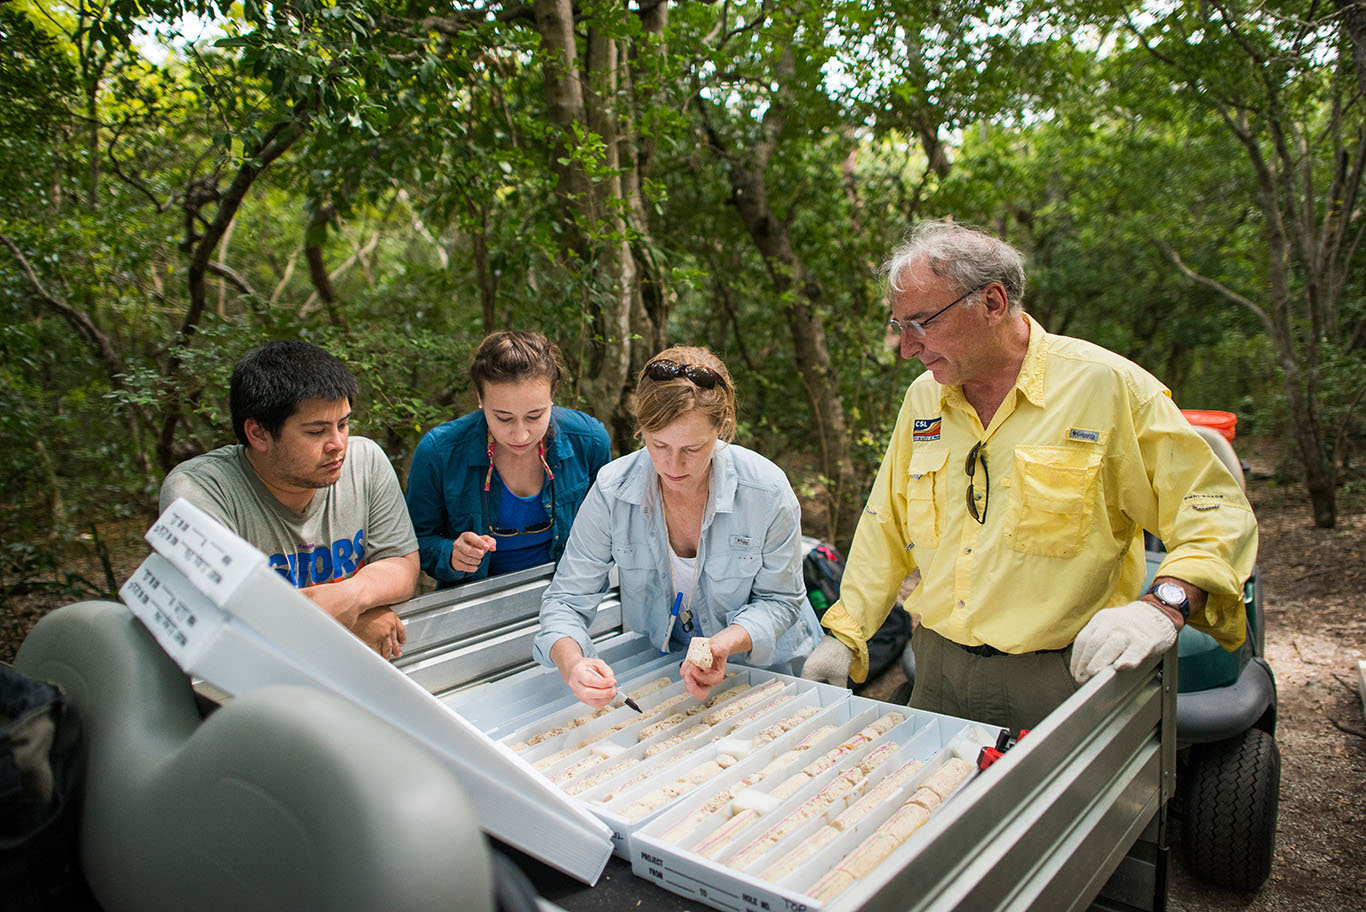 On the left, PhD students Peter Chutcharavan and Karen Vyverberg and on the right, Professor Andrea Dutton and Professor Gregor Eberli from the University of Miami inspect a fresh drill core of the approximately 125,000-year old fossil reef on Lignumvitae Key.